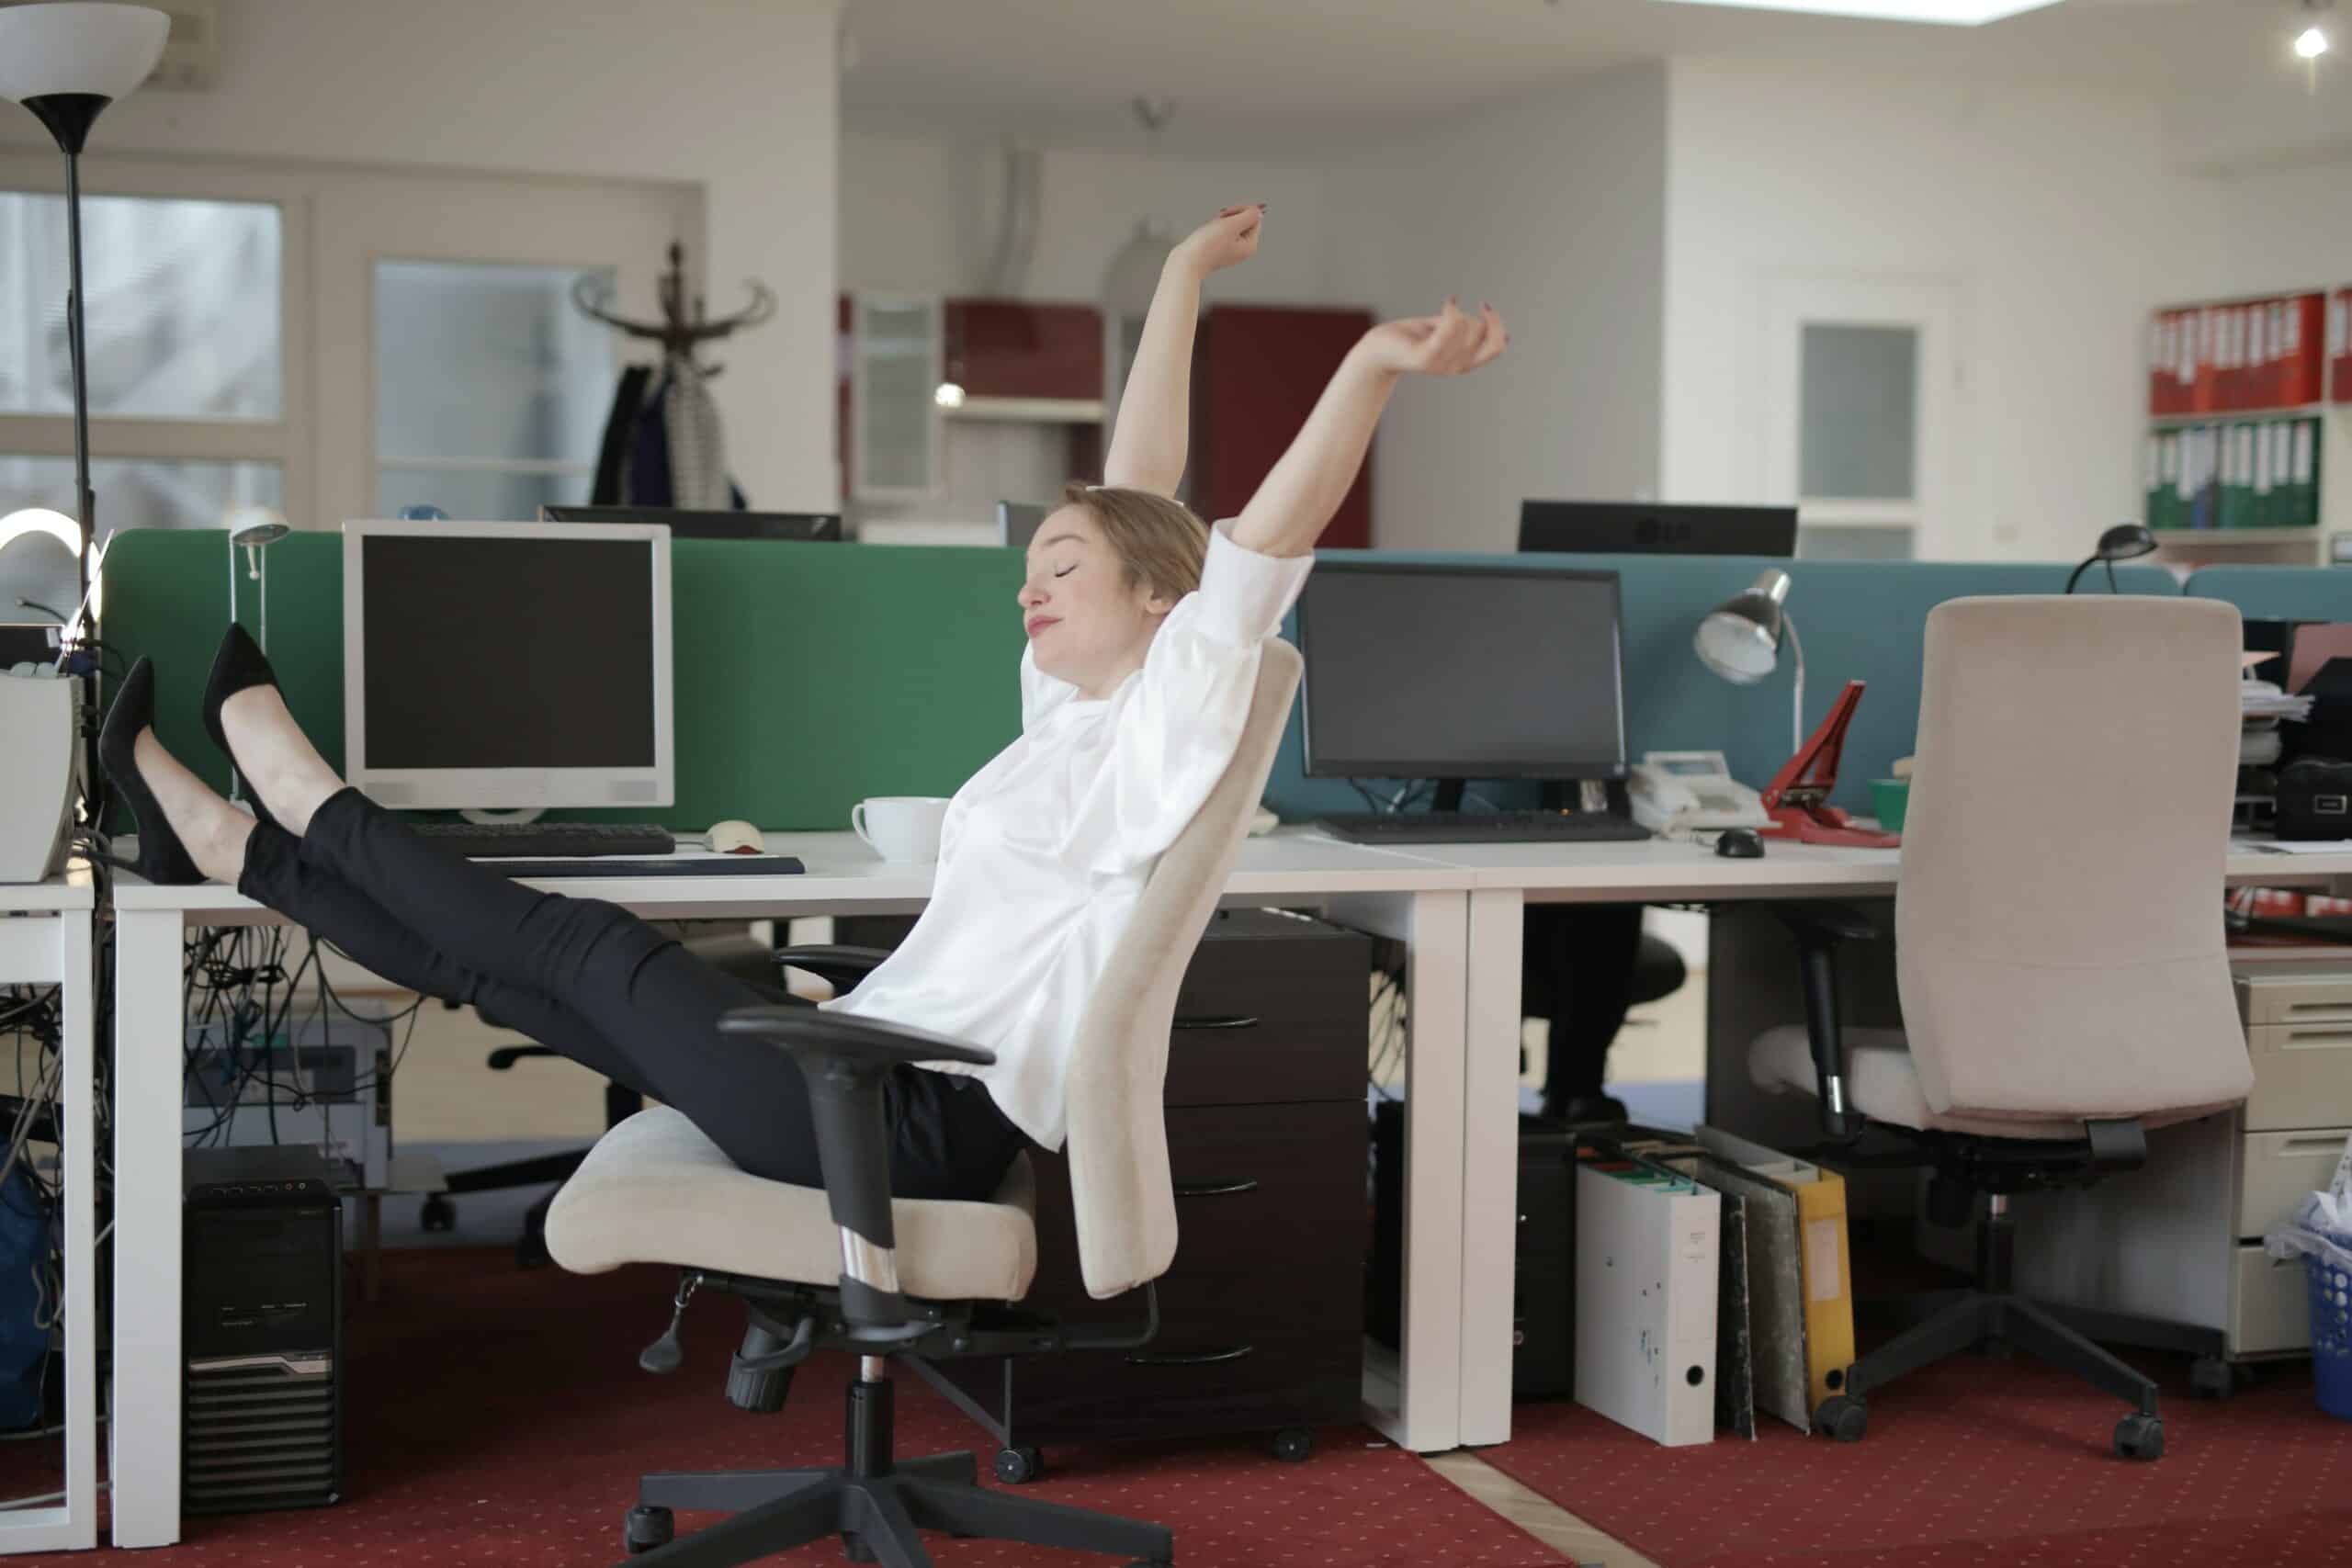 a worker with their feet on their work desk and arms raised, meant to signify lounging at work